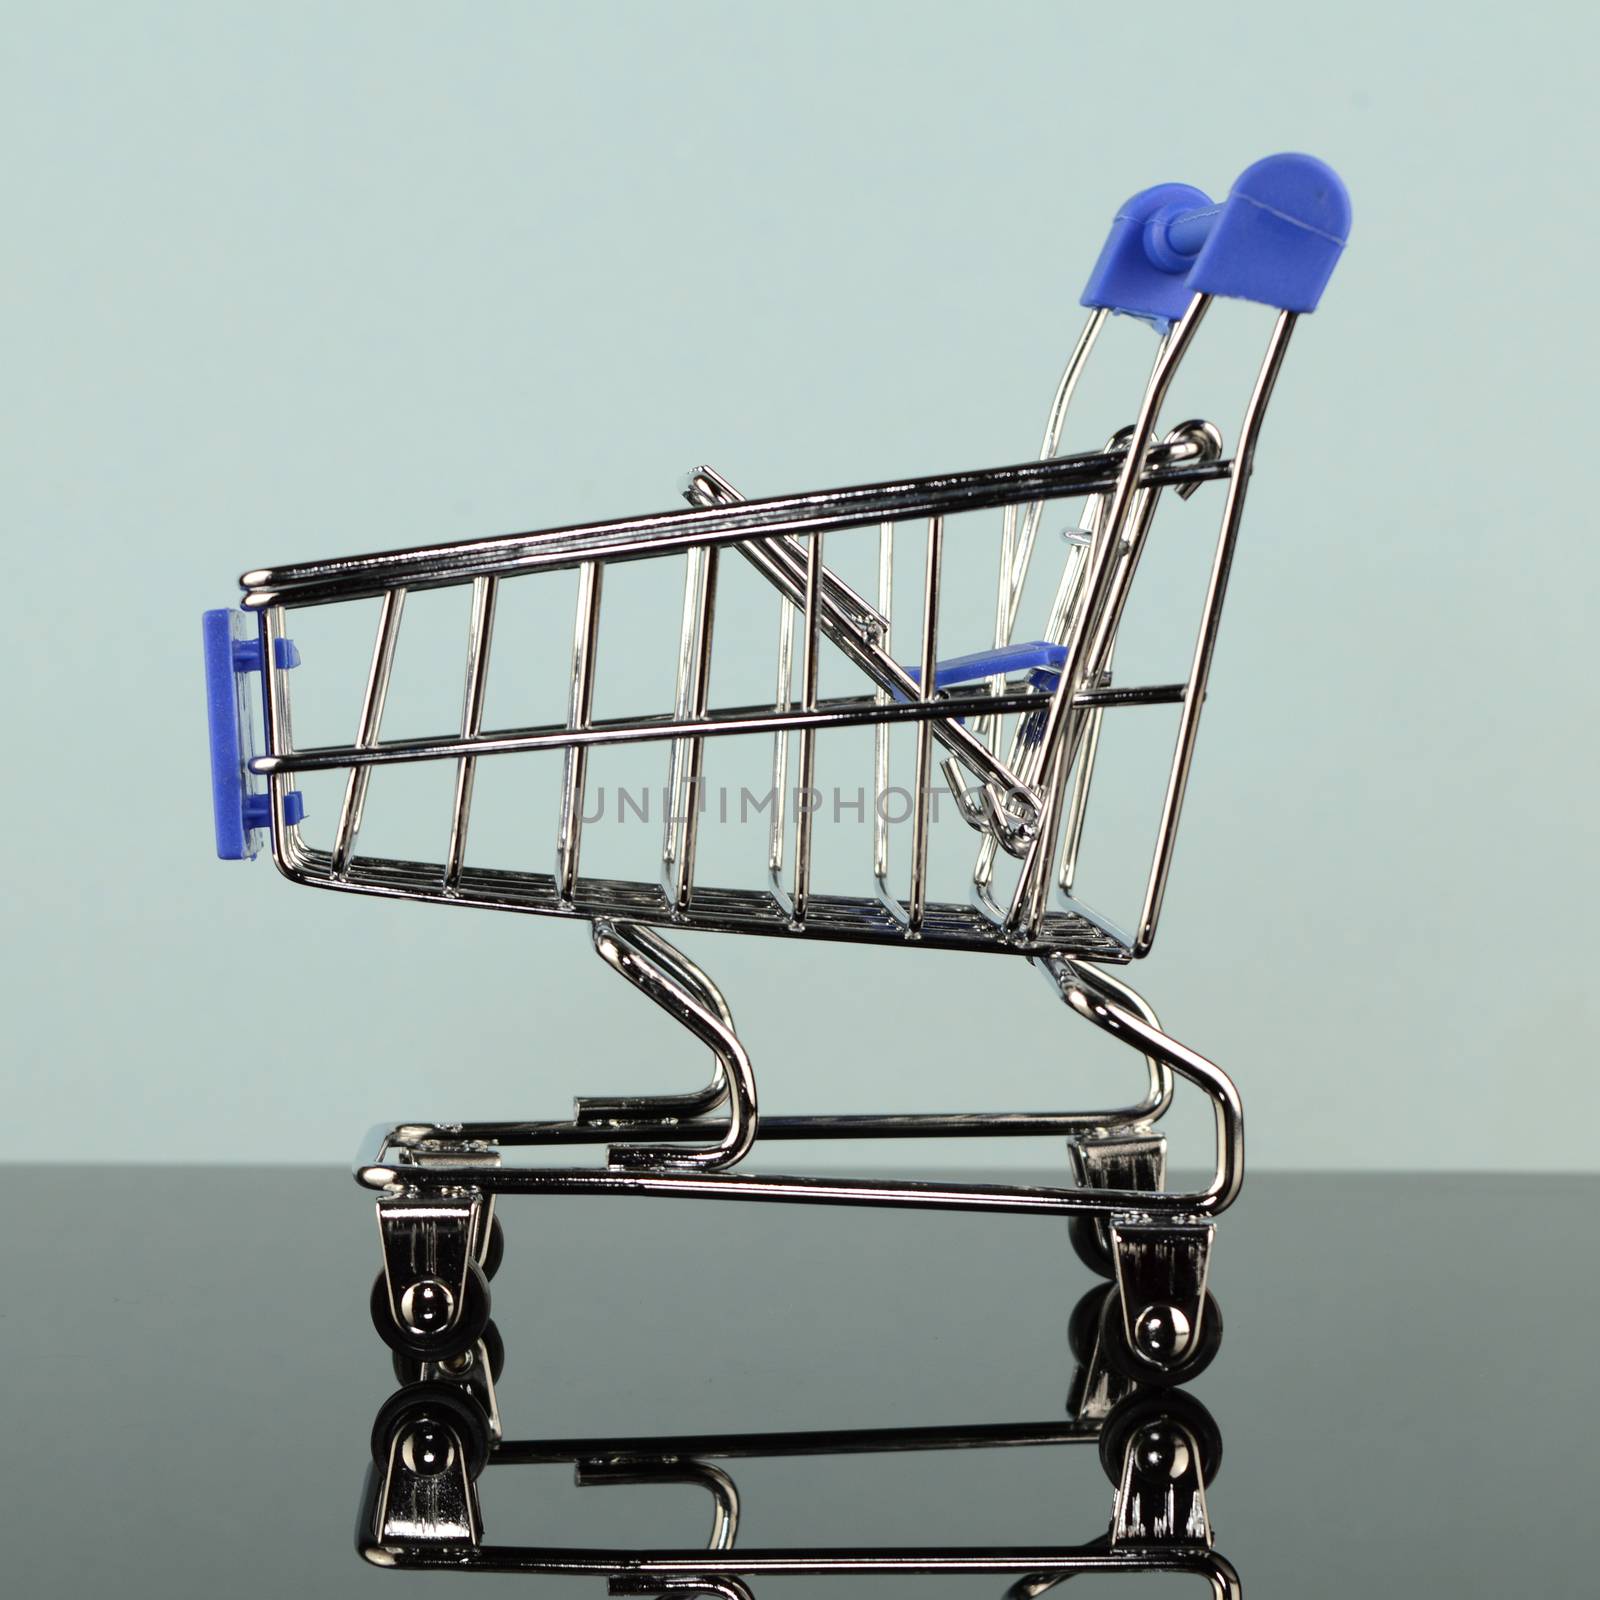 A square format image of a miniature shopping cart over a blue reflective background.